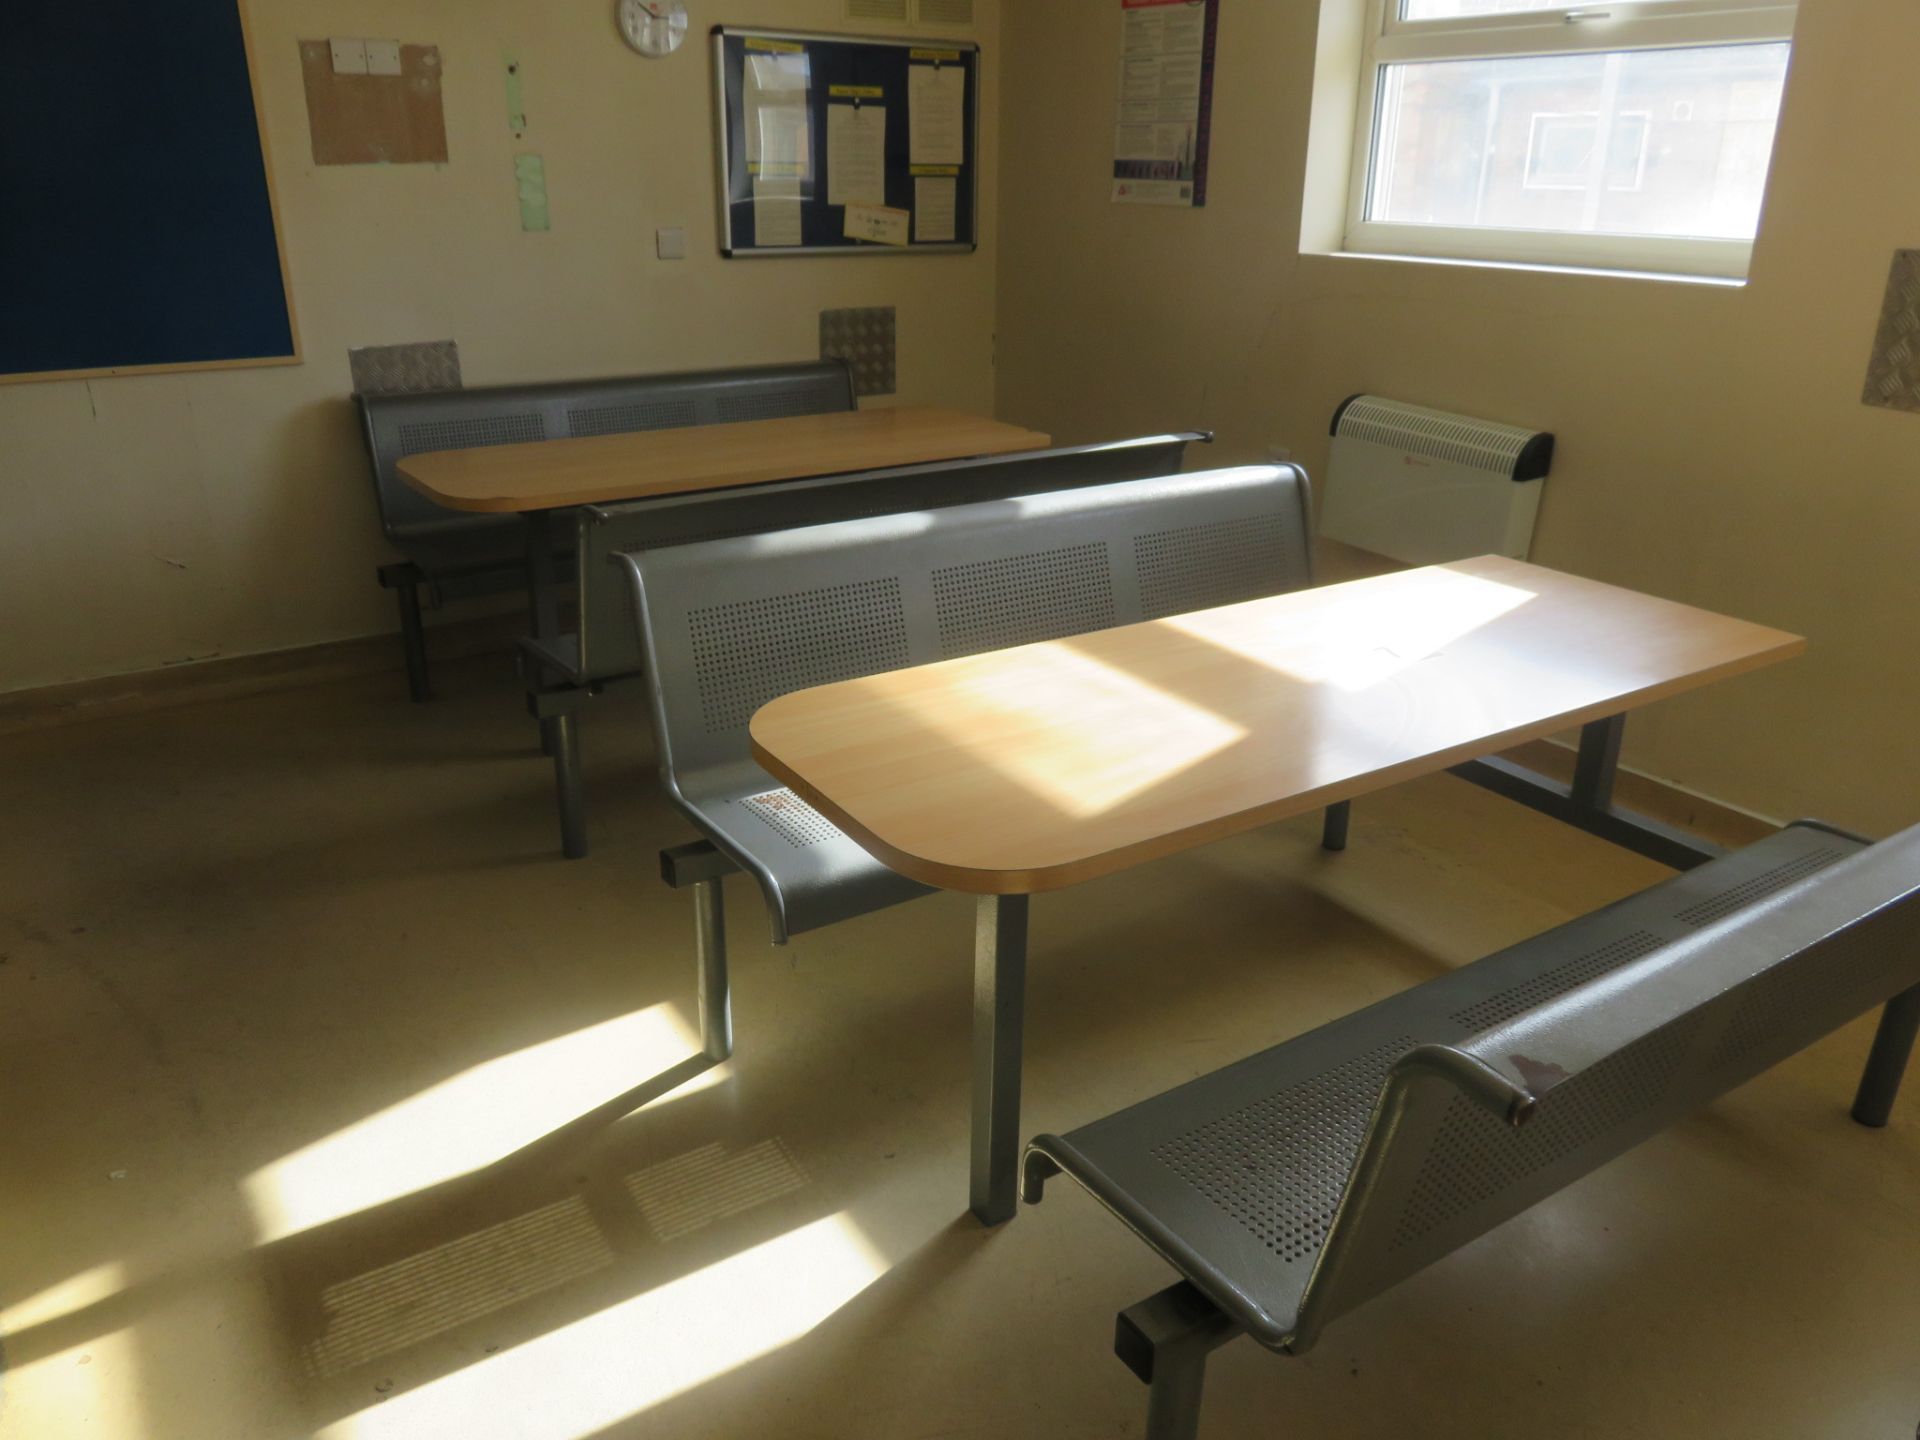 2 x Canteen tables with benches either side. Approx. 1.6 table length x overall 1.8 wi Lift out £10